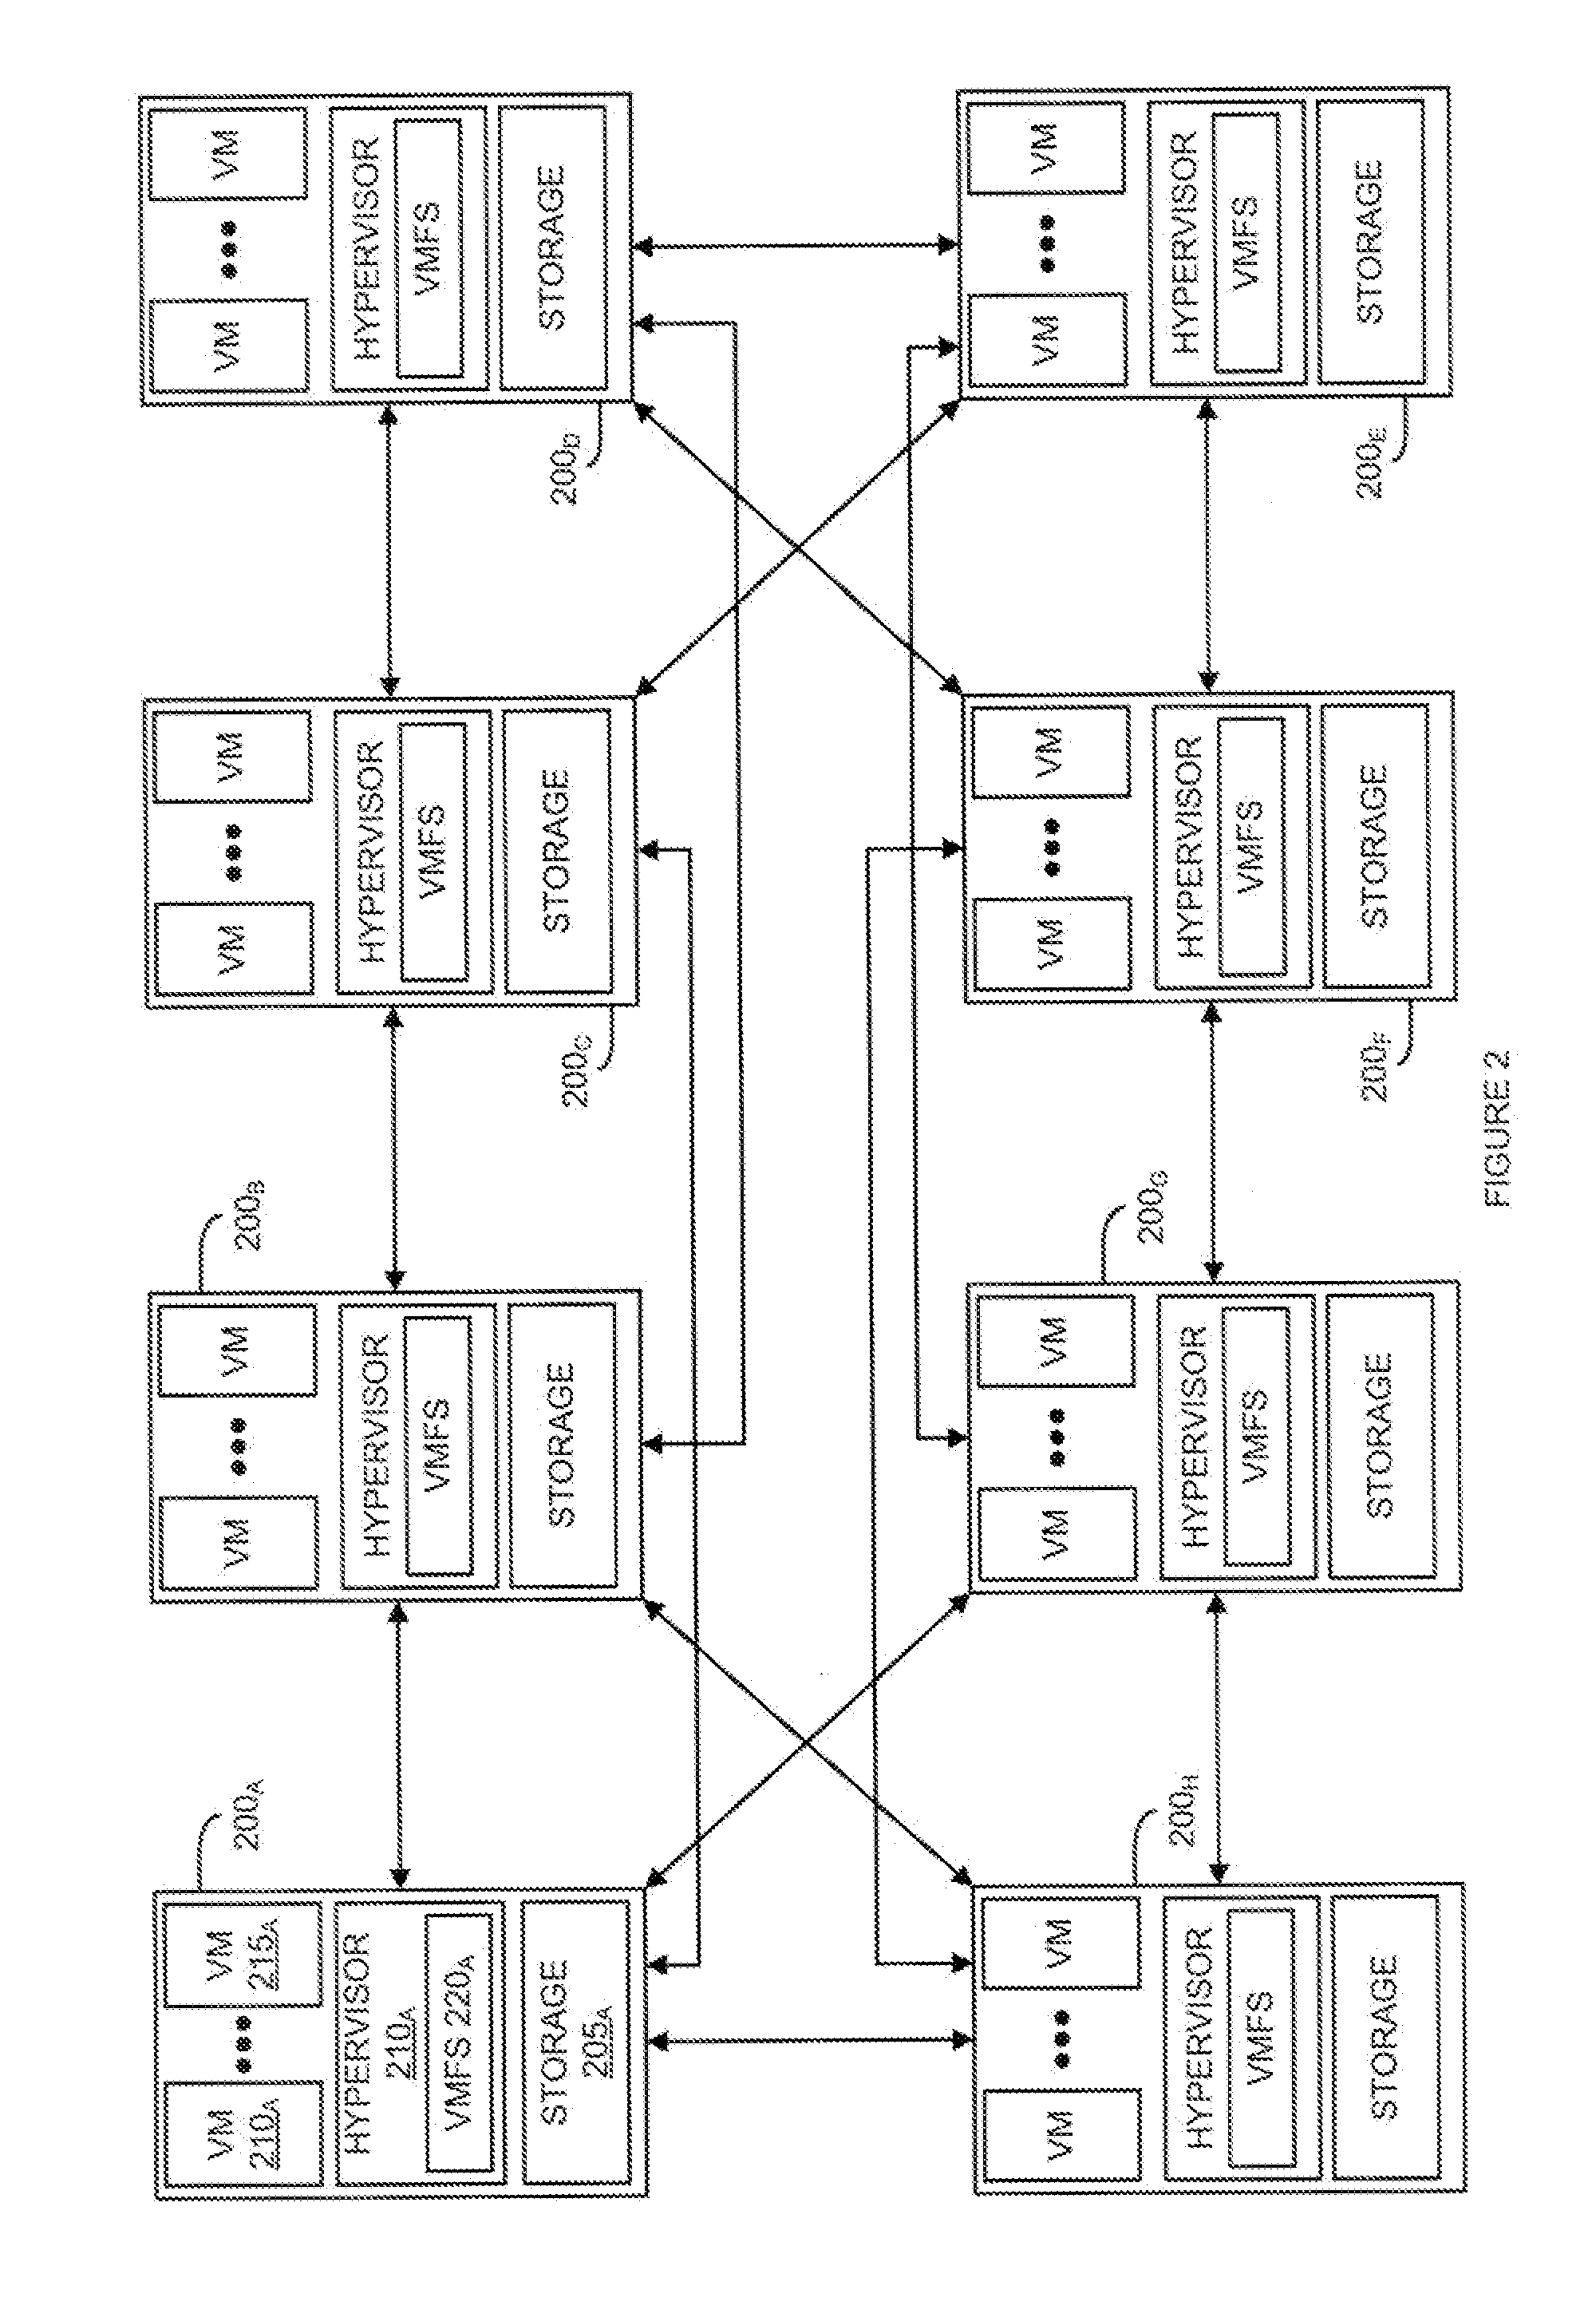 System and Method for Replicating Disk Images in a Cloud Computing Based Virtual Machine File System